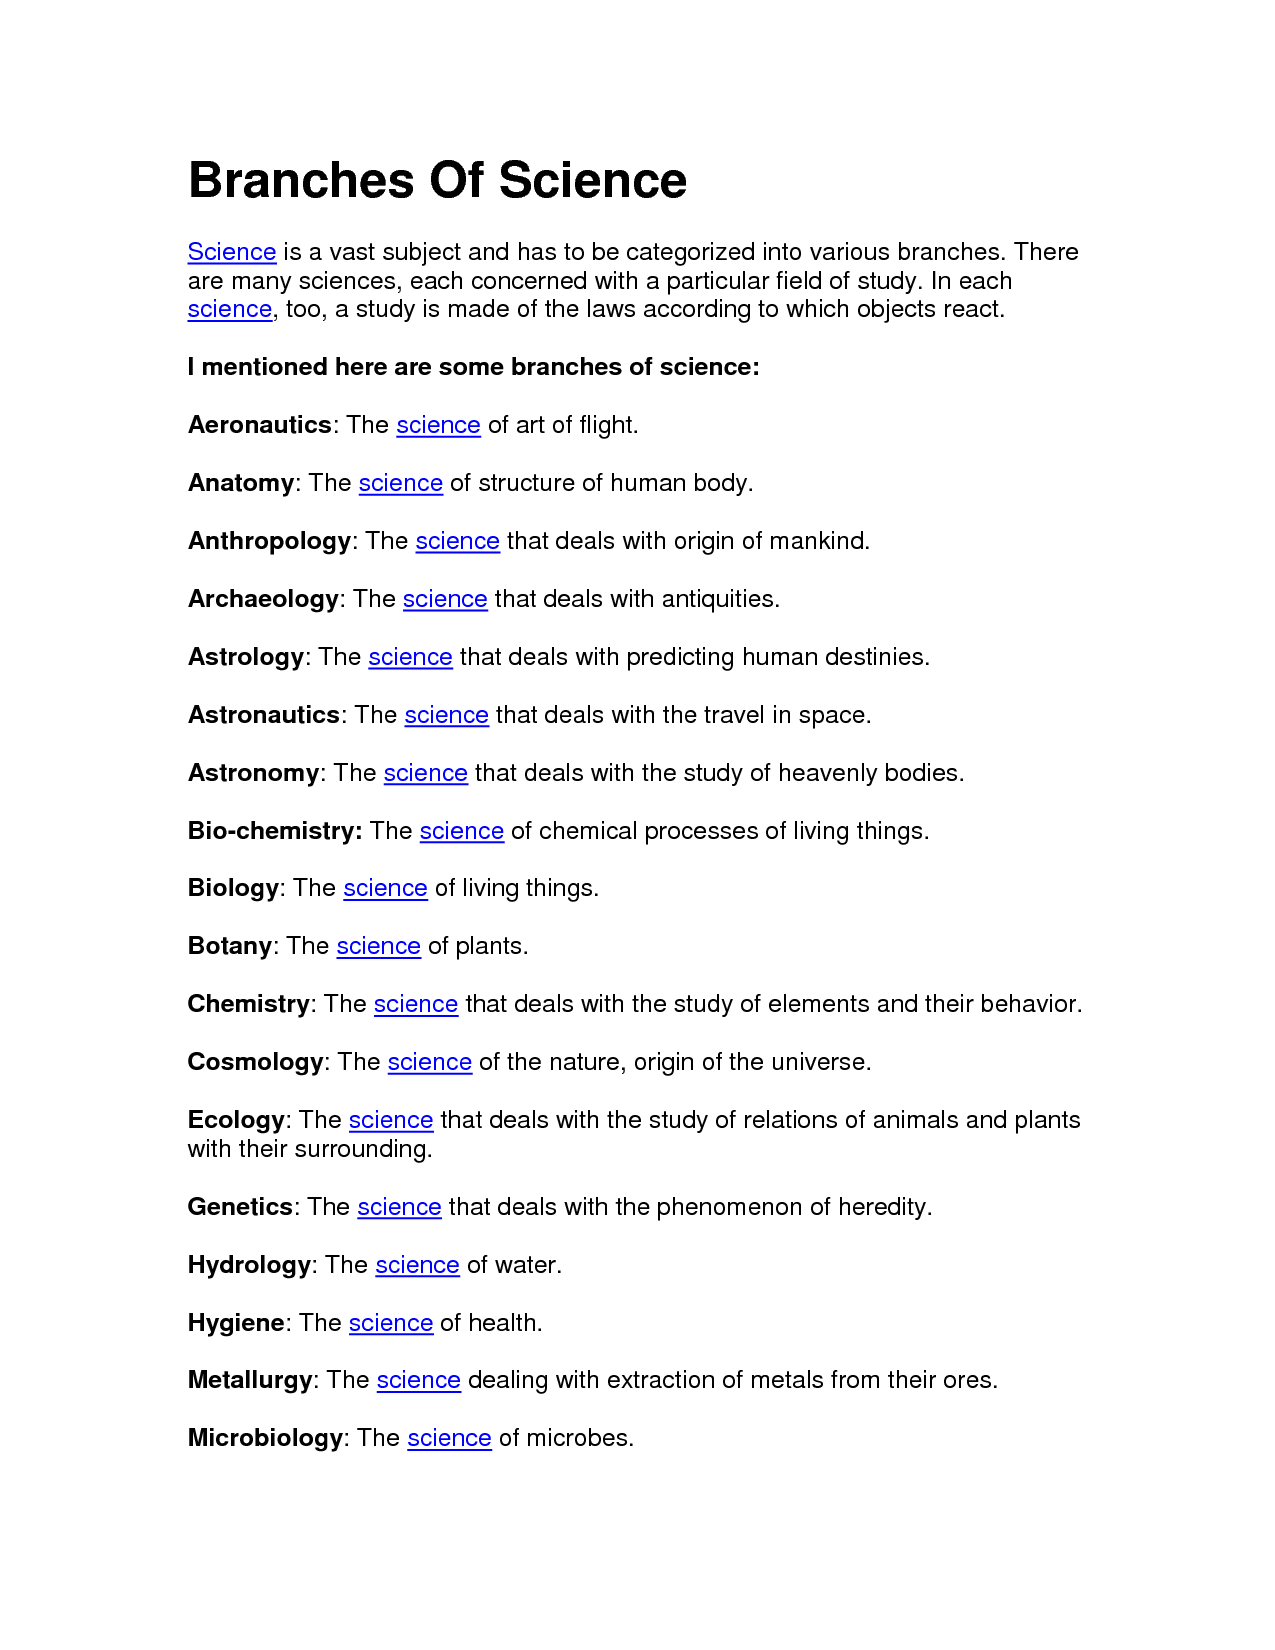 5 Best Images of Branches Of Science Worksheet - Physical Science